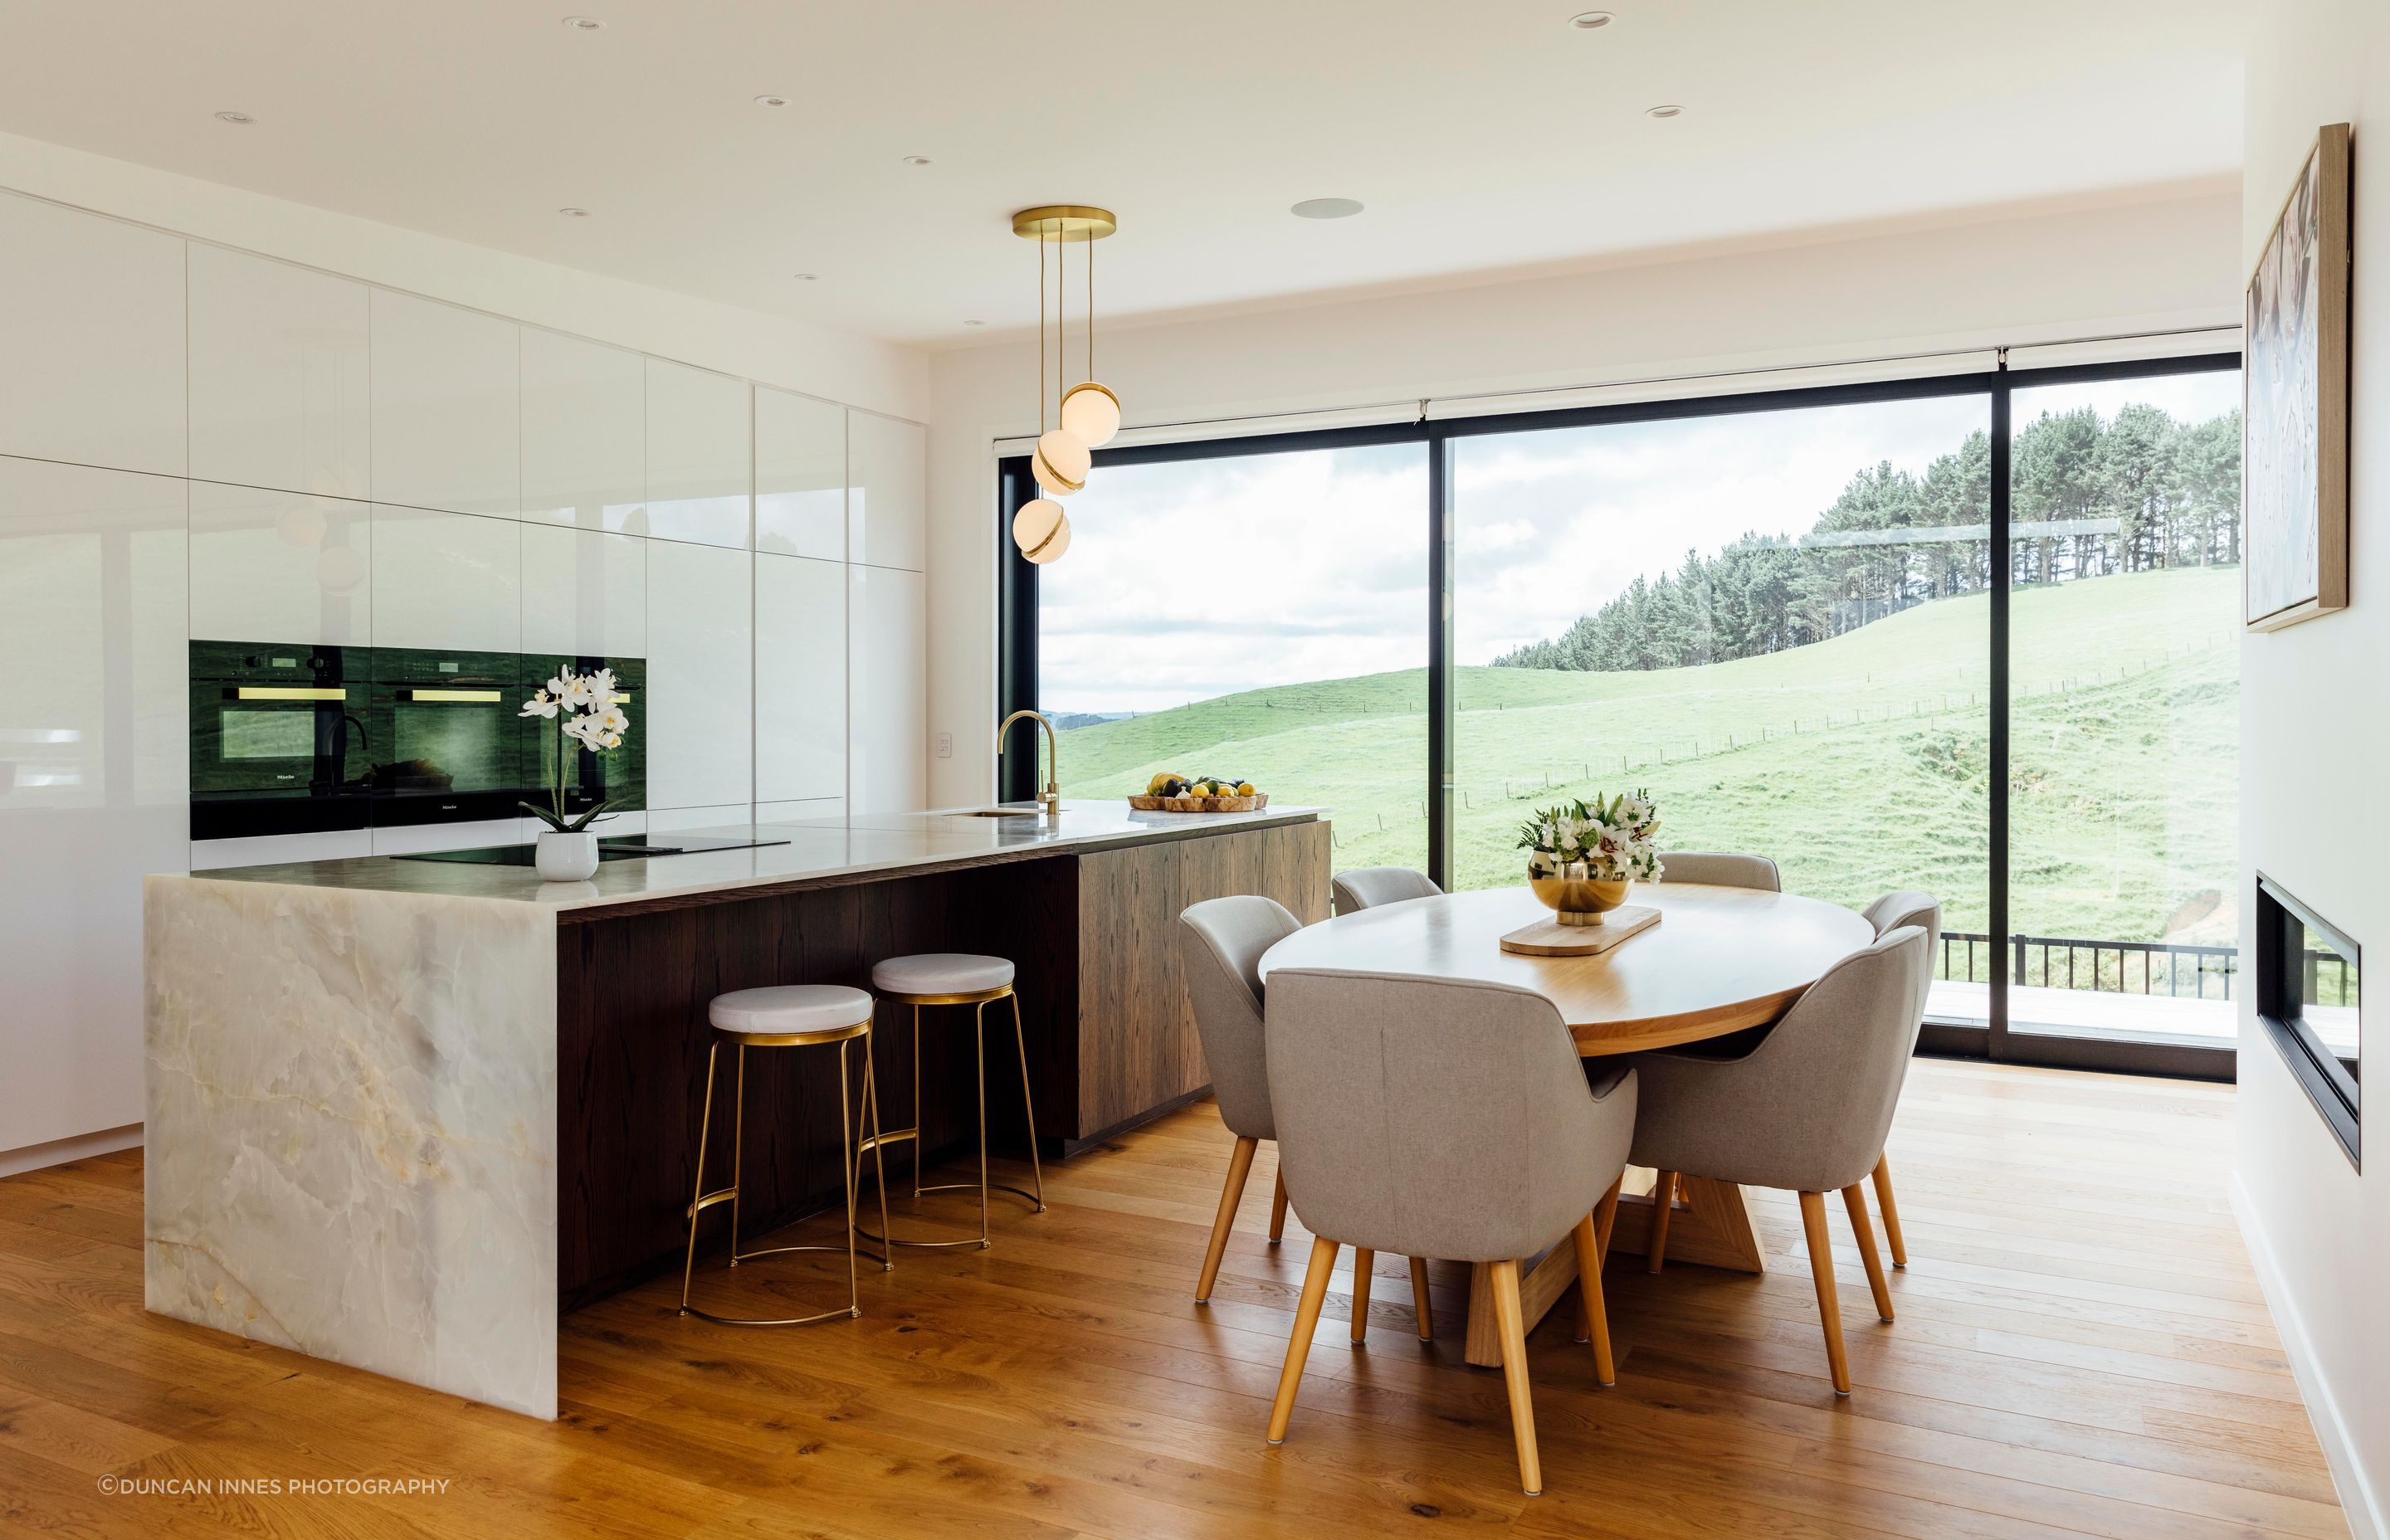 David Reid Homes collaborated with Cube Dentro and the homeowners on the luxe interiors. “Raked ceilings through the lounge and kitchen area and through into the master bedroom follow the roofline,” says Brendon.